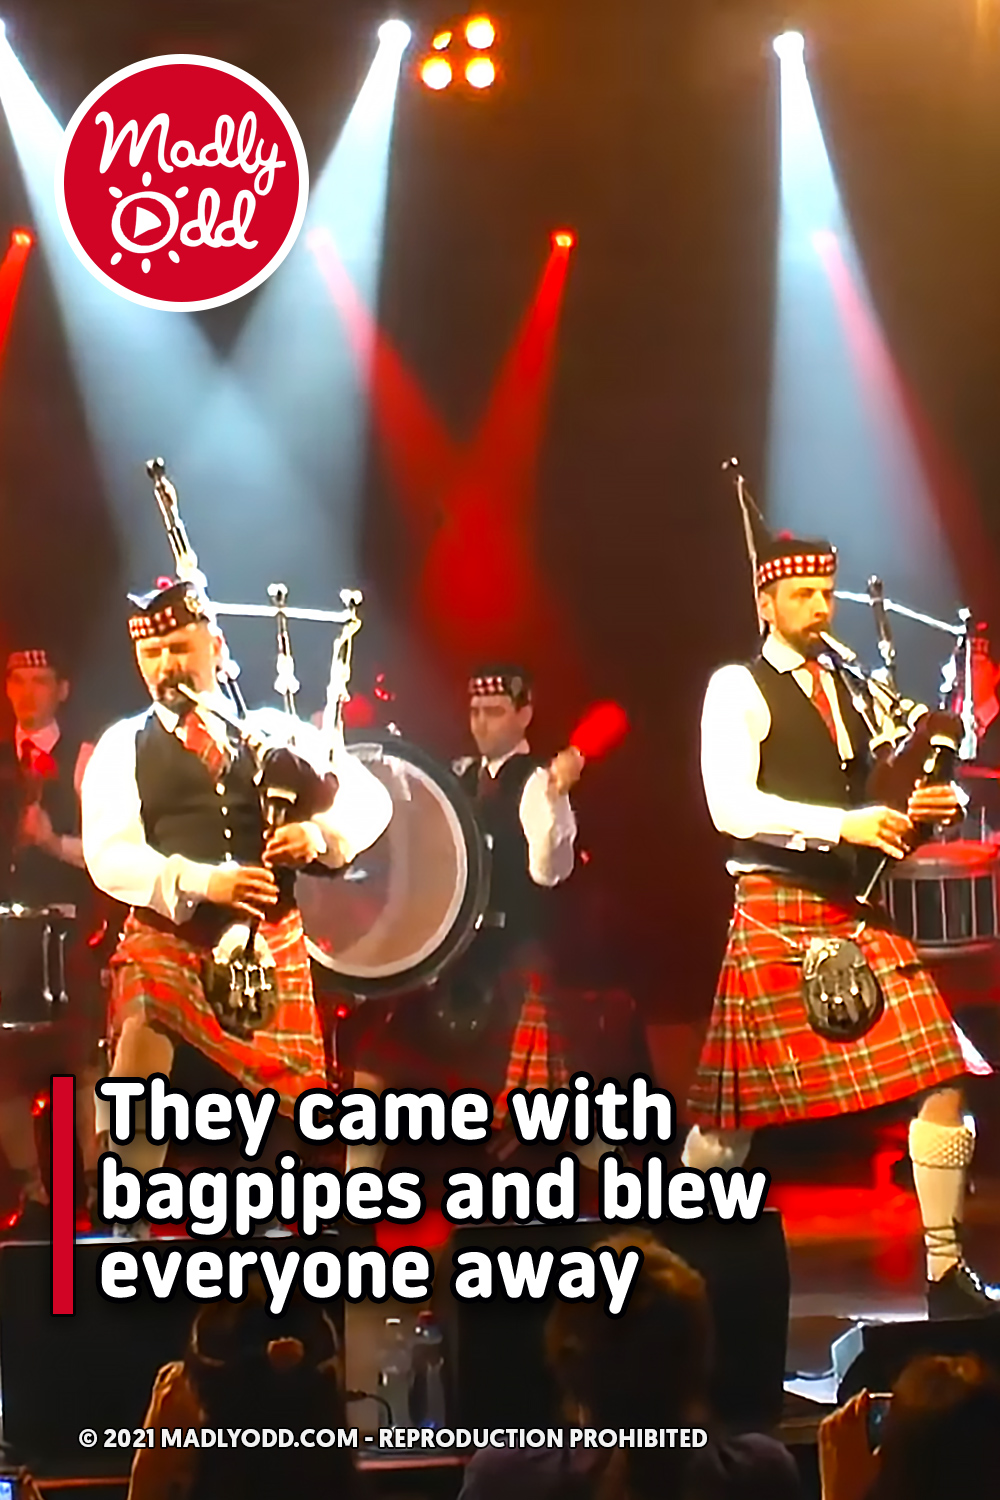 They came with bagpipes and blew everyone away